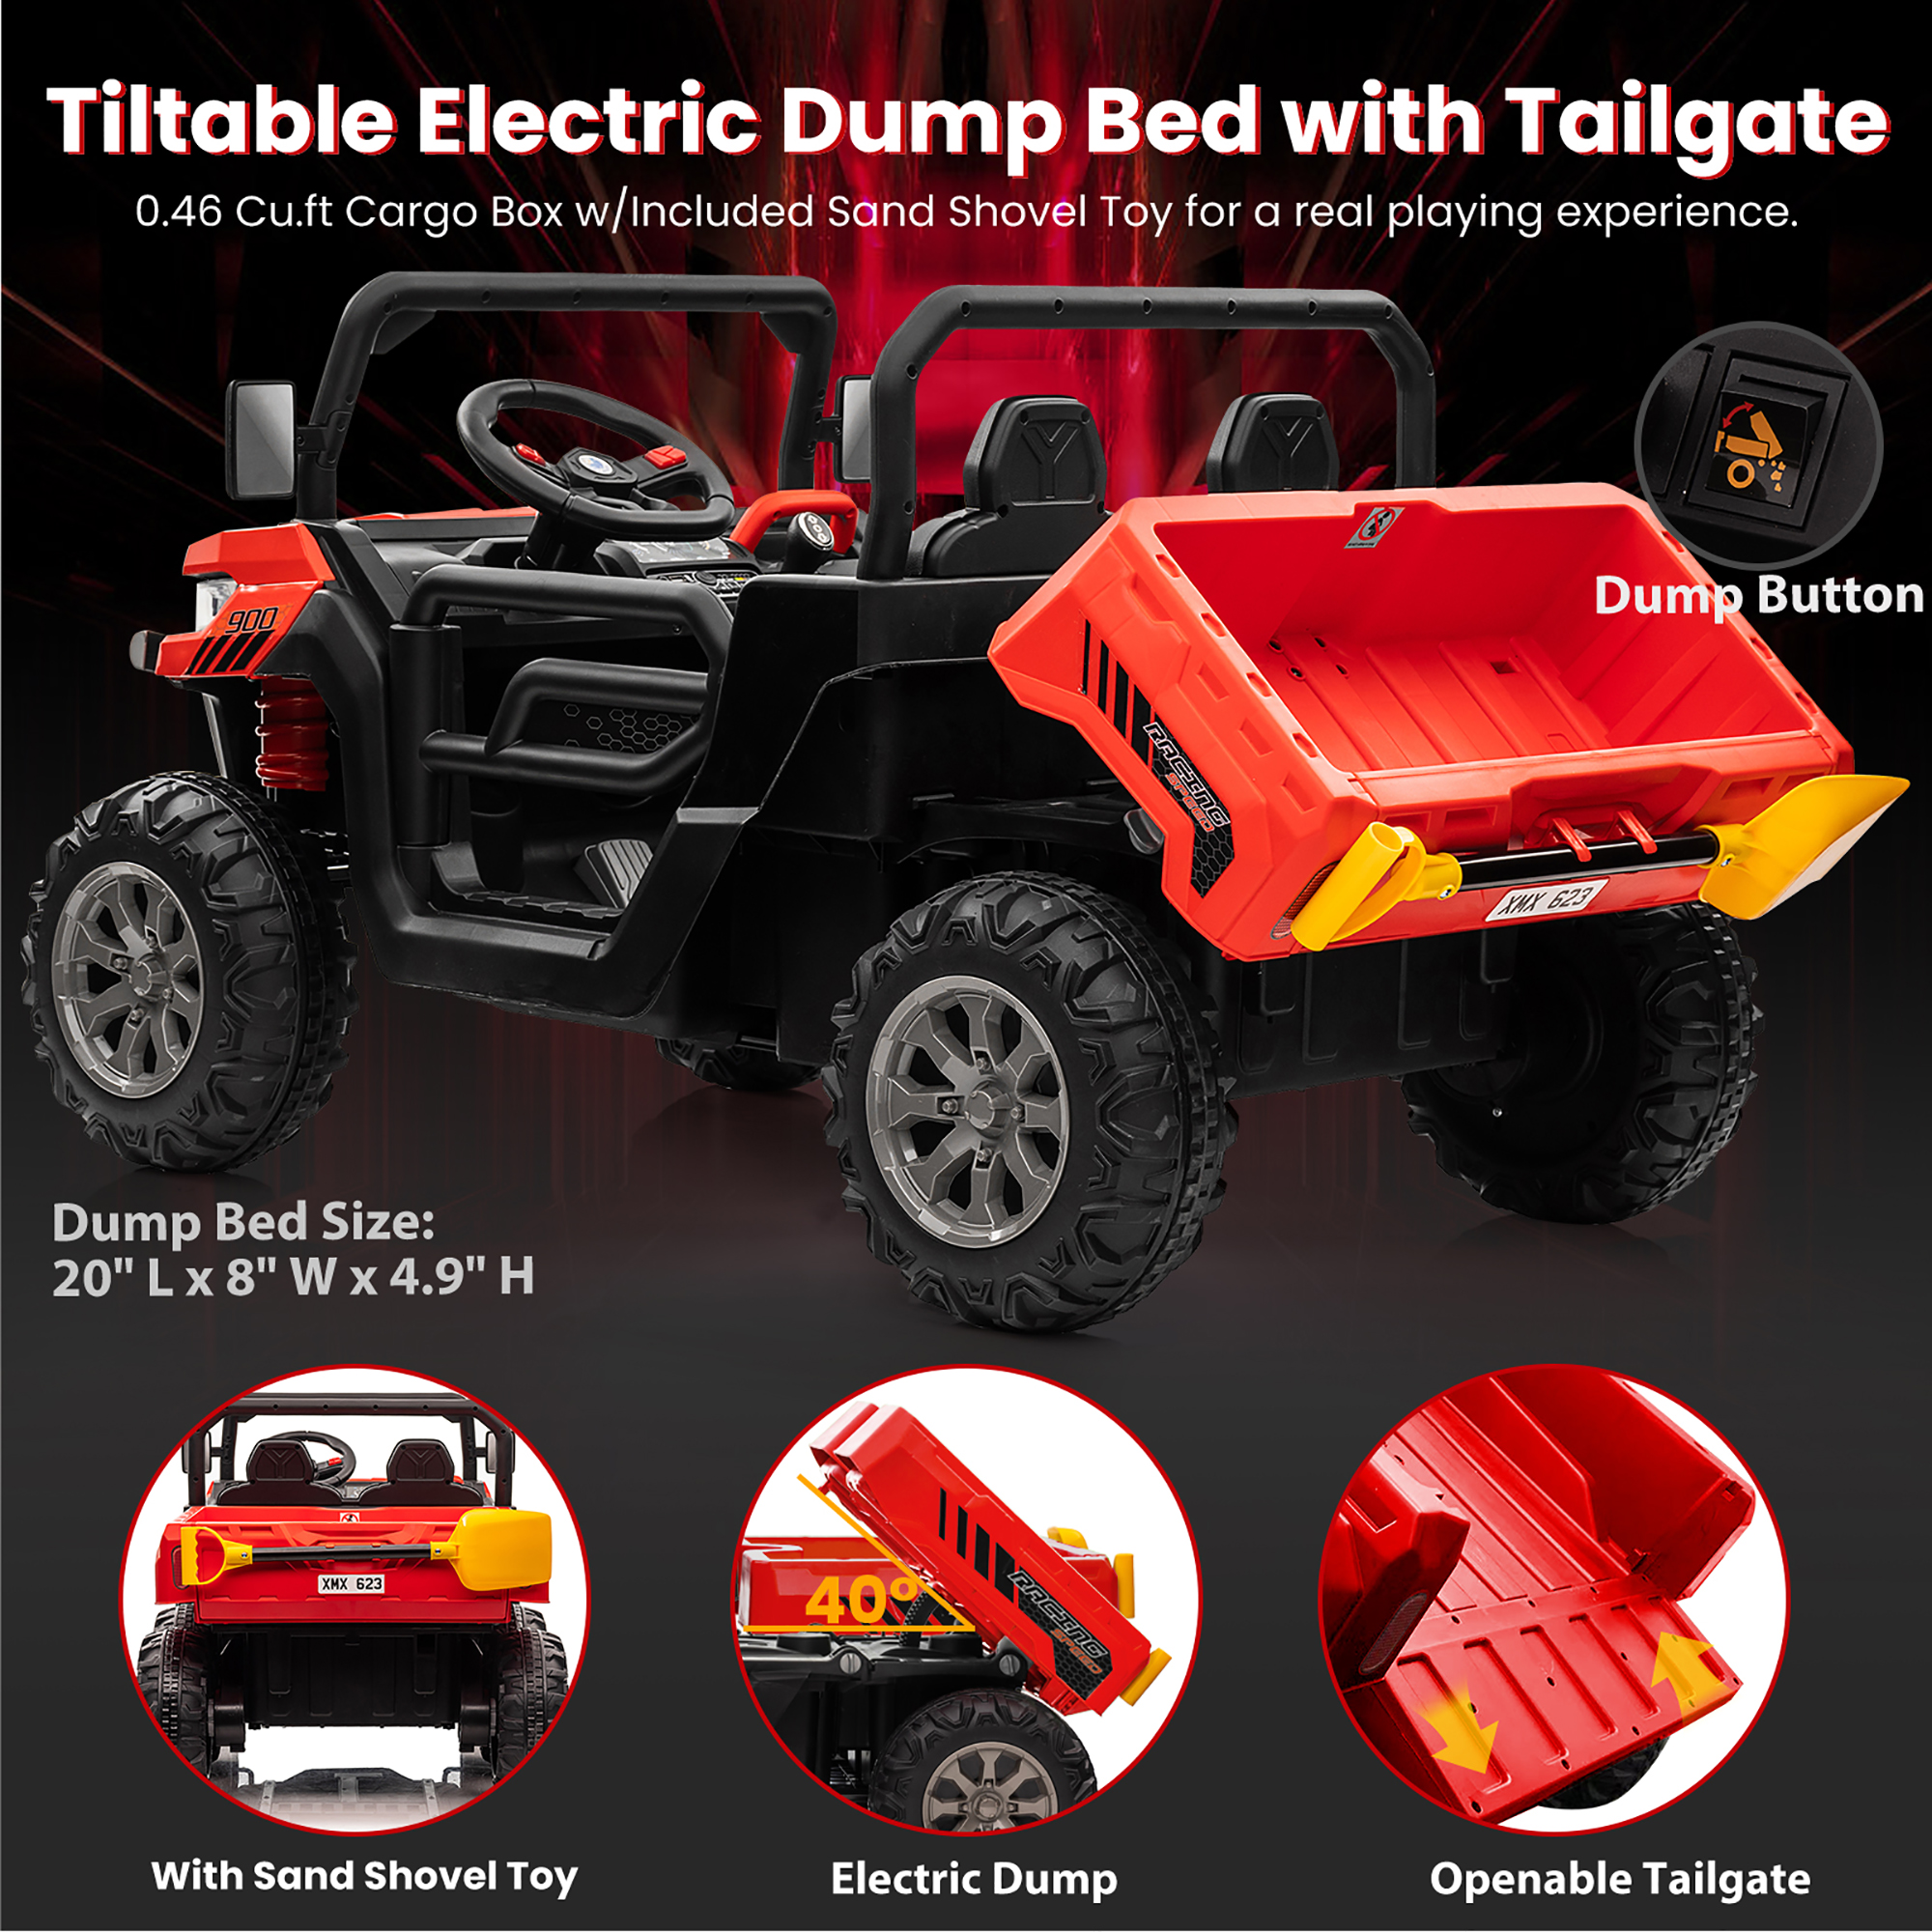 Joyracer 24V Ride on UTV with Remote Control, 2 Seater Ride on Dump Truck Car w/ 2x200W Motor, Electric Battery Powered Ride on Toys with Trailer & Shovel, Horn, MP3, Bluetooth Music for Big Kids, Red - image 4 of 15